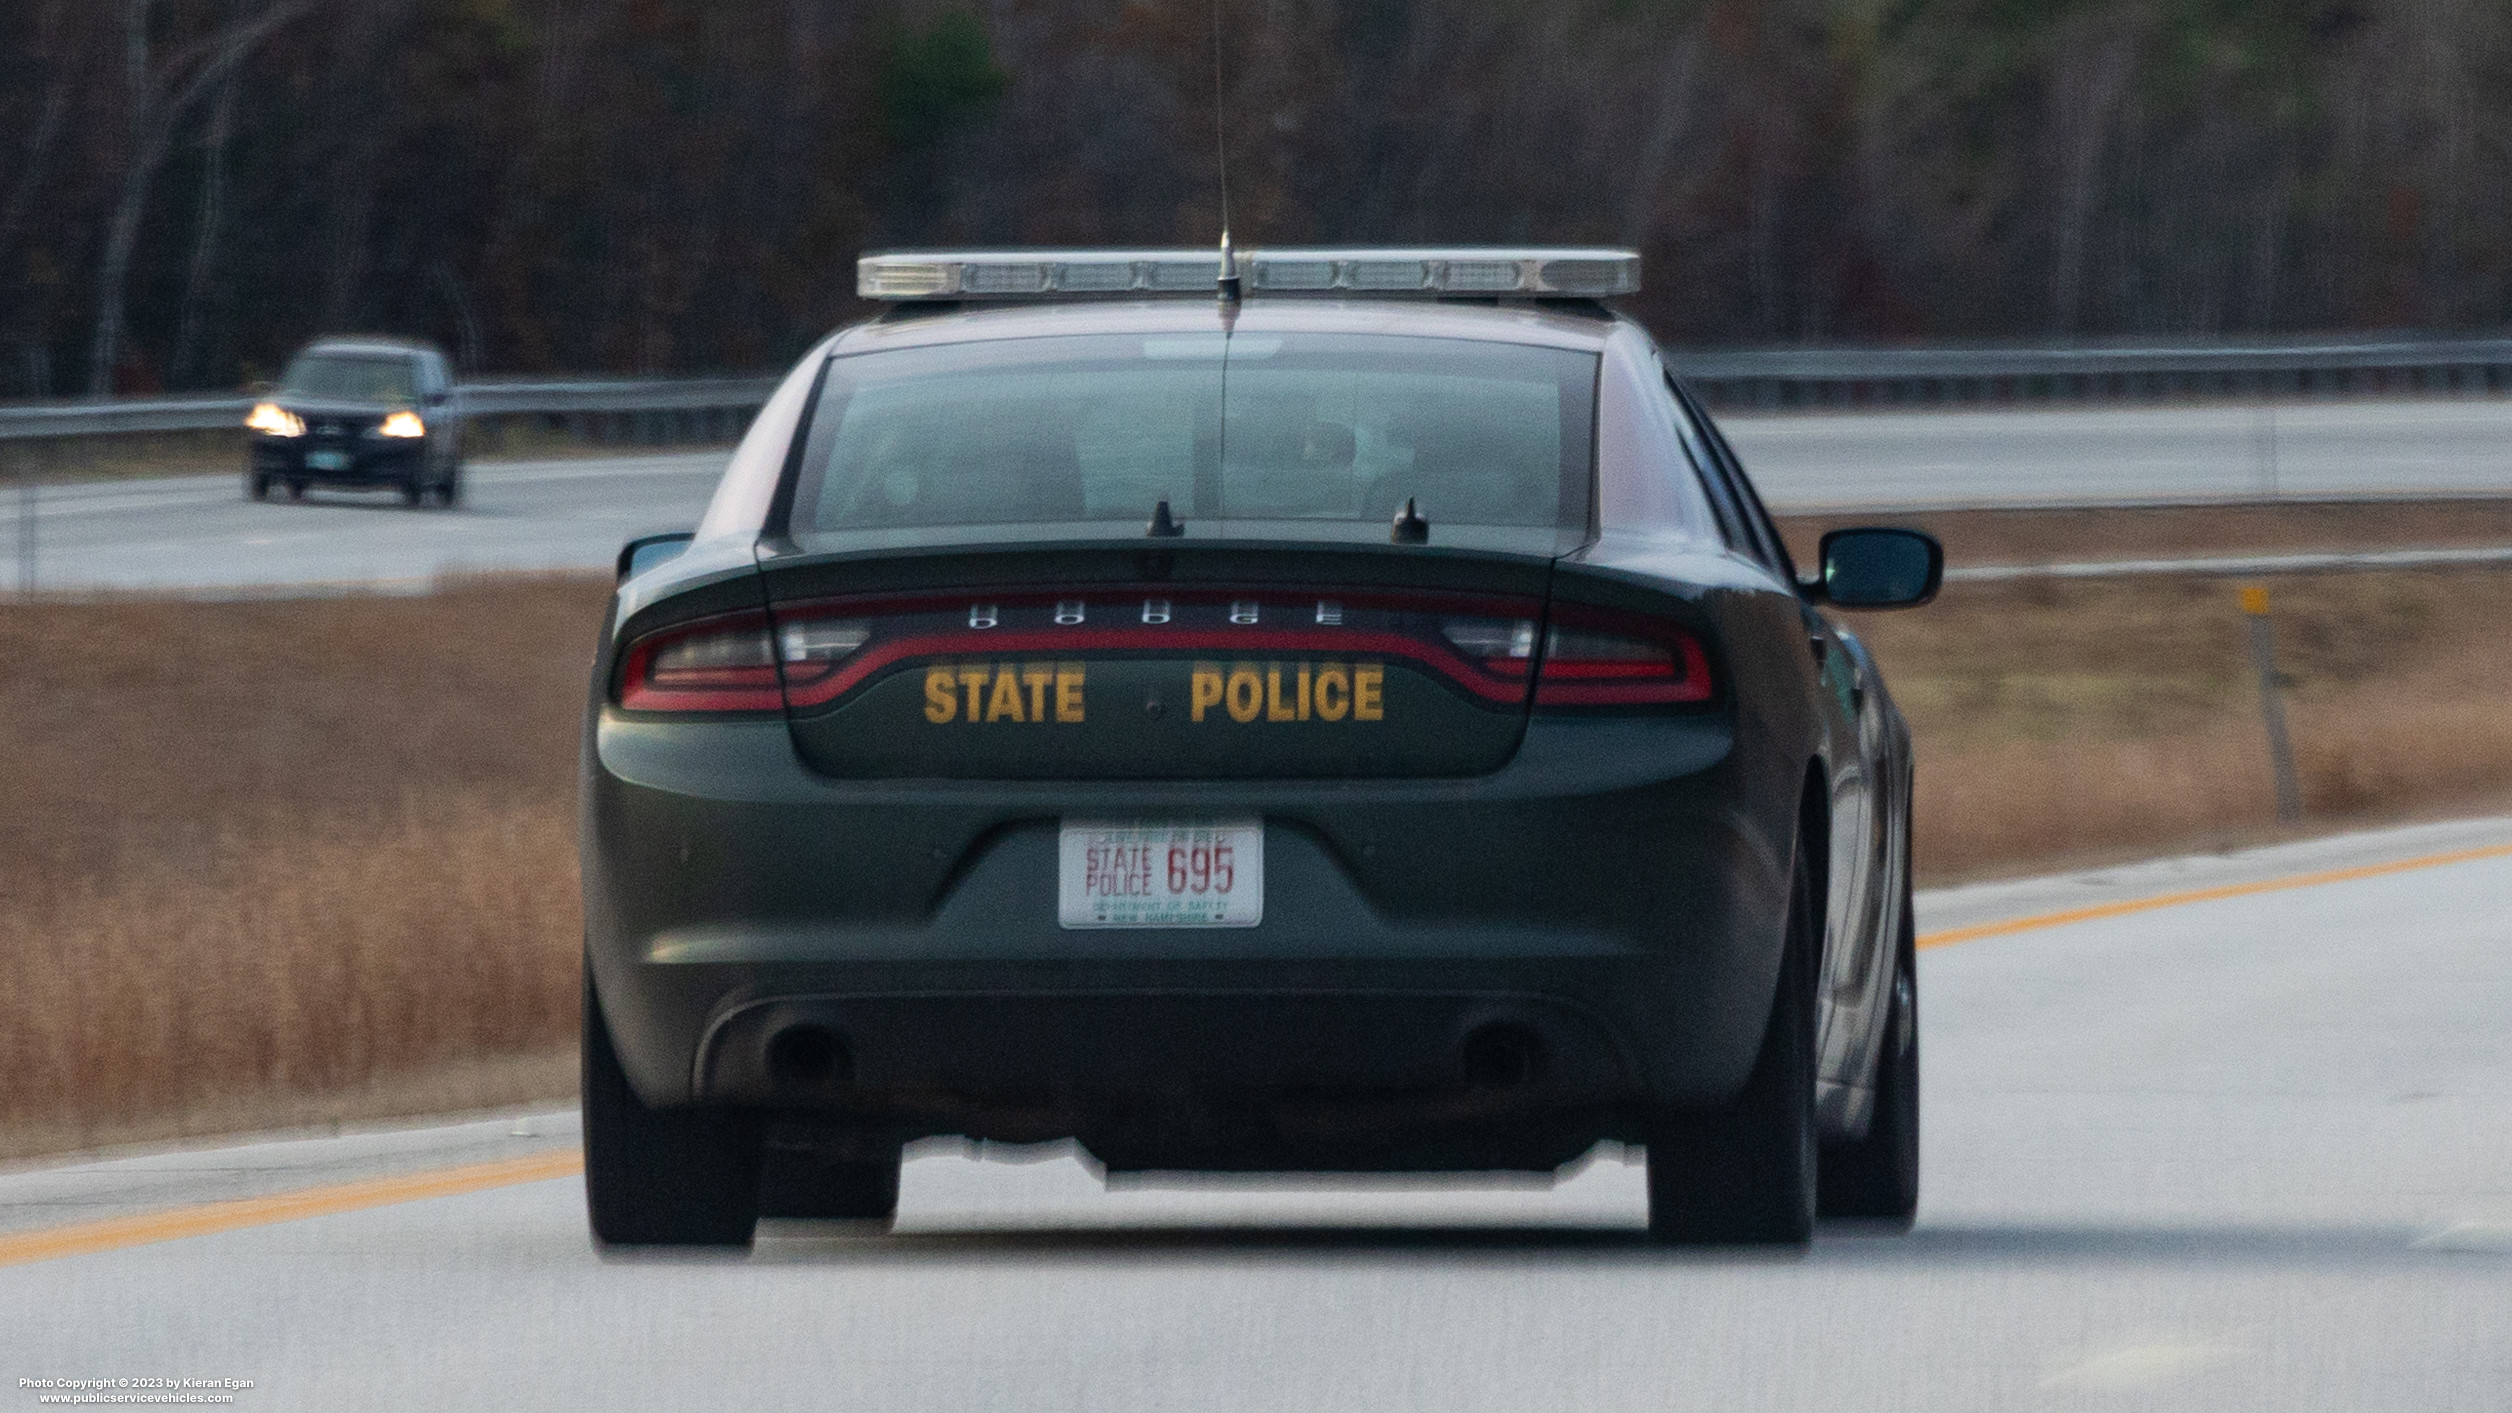 A photo  of New Hampshire State Police
            Cruiser 695, a 2015-2016 Dodge Charger             taken by Kieran Egan